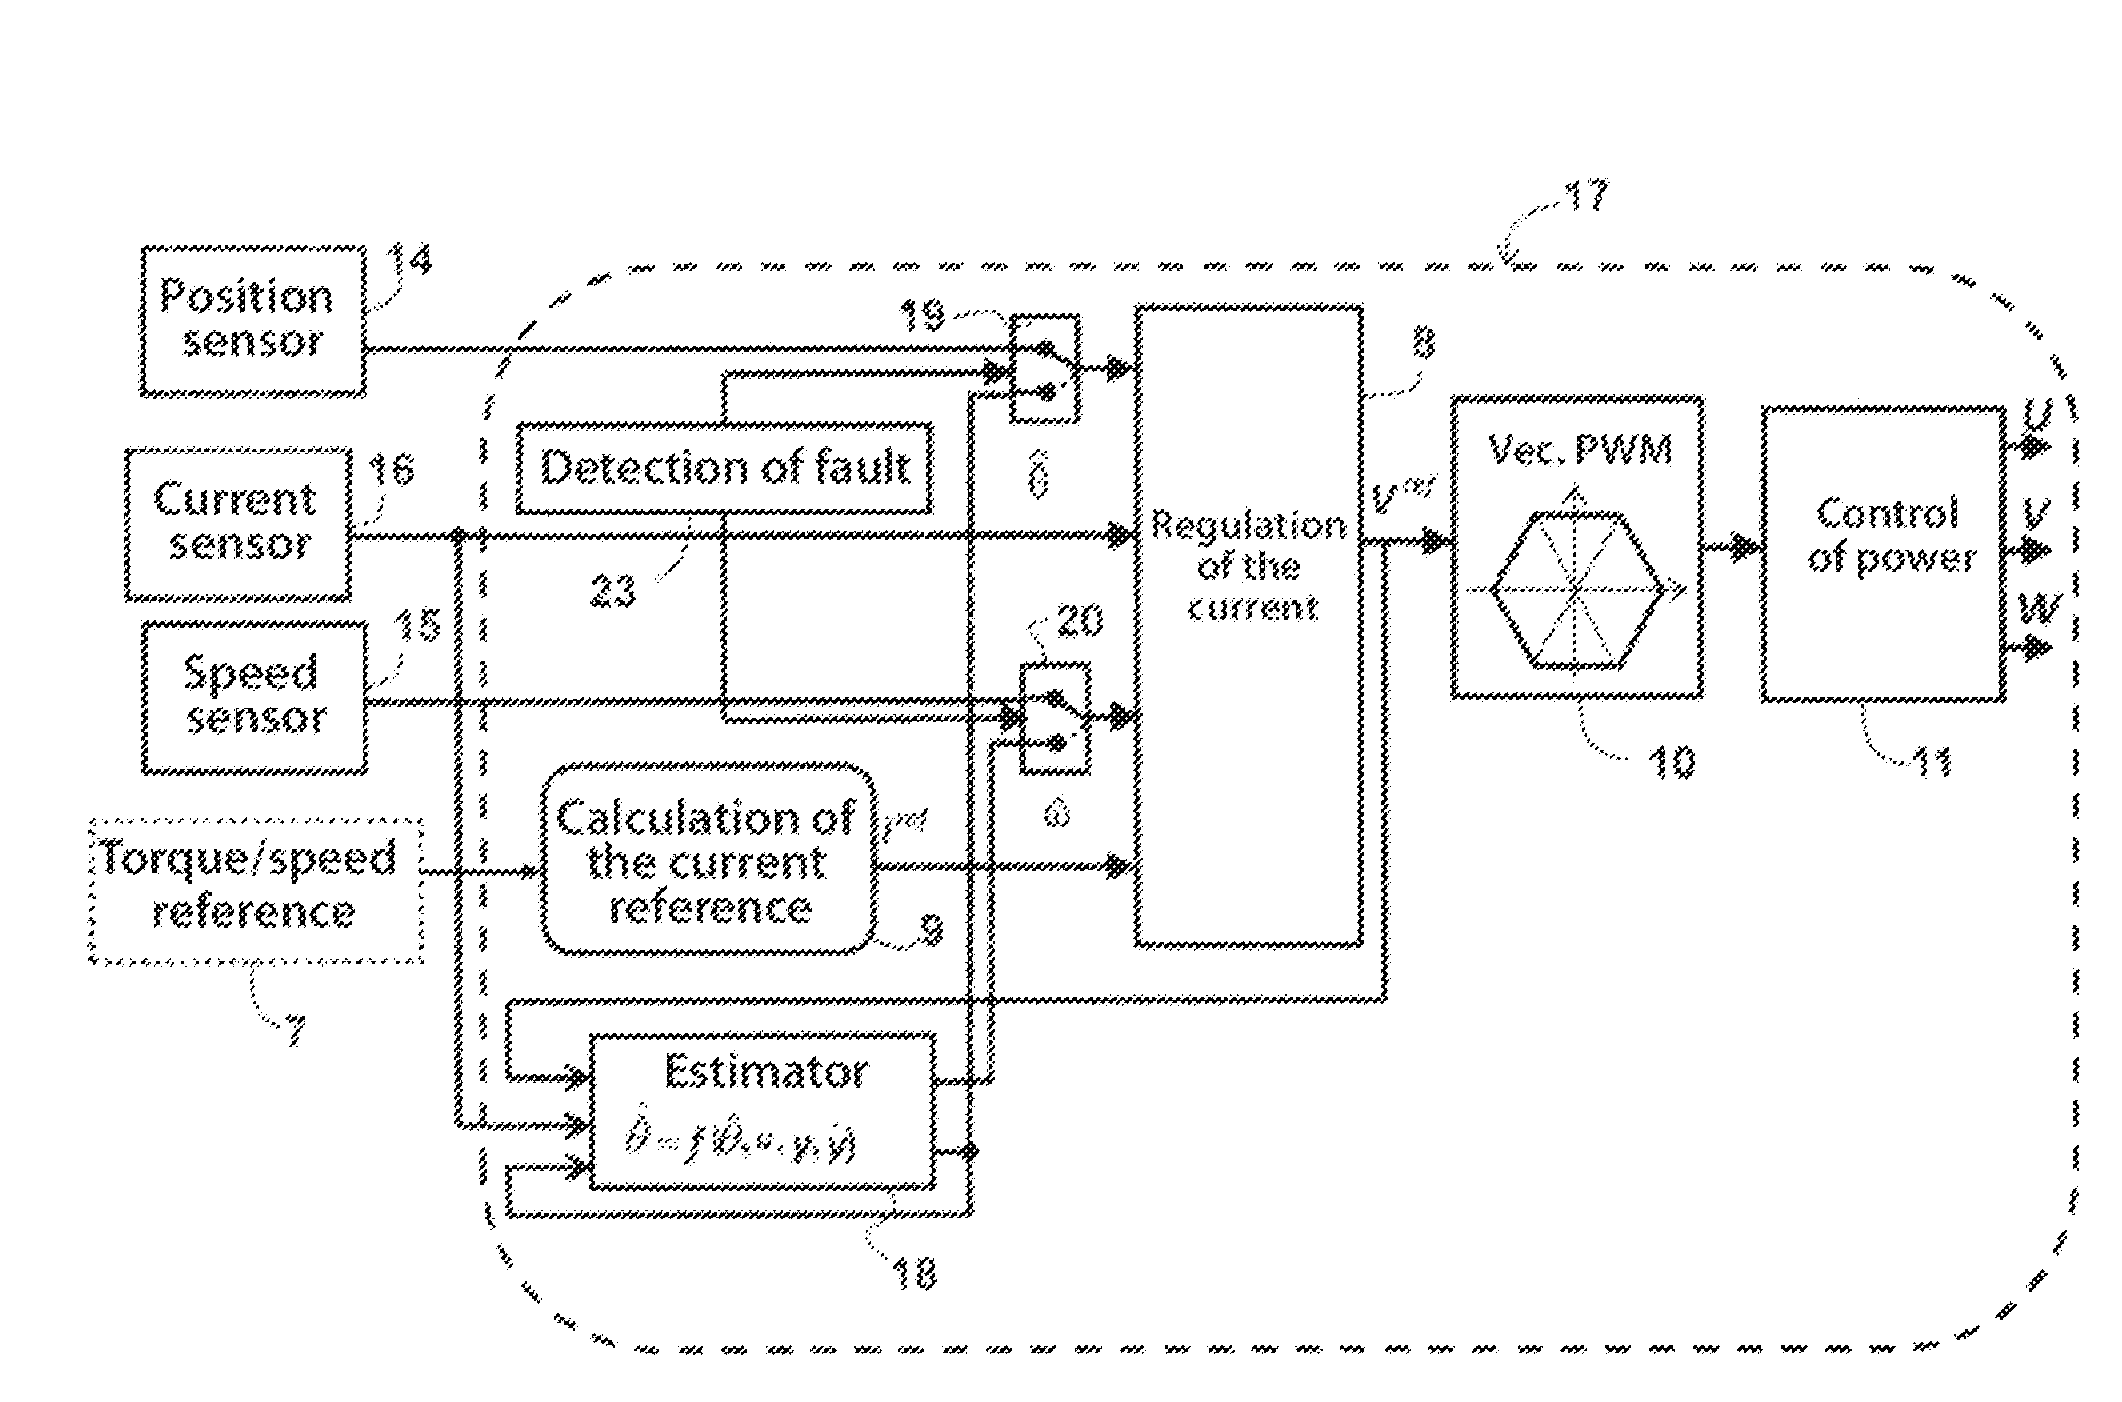 Method for estimating the angular position of the rotor of a polyphase rotary electrical machine, and application to the control of a polyphase inverter for such a machine